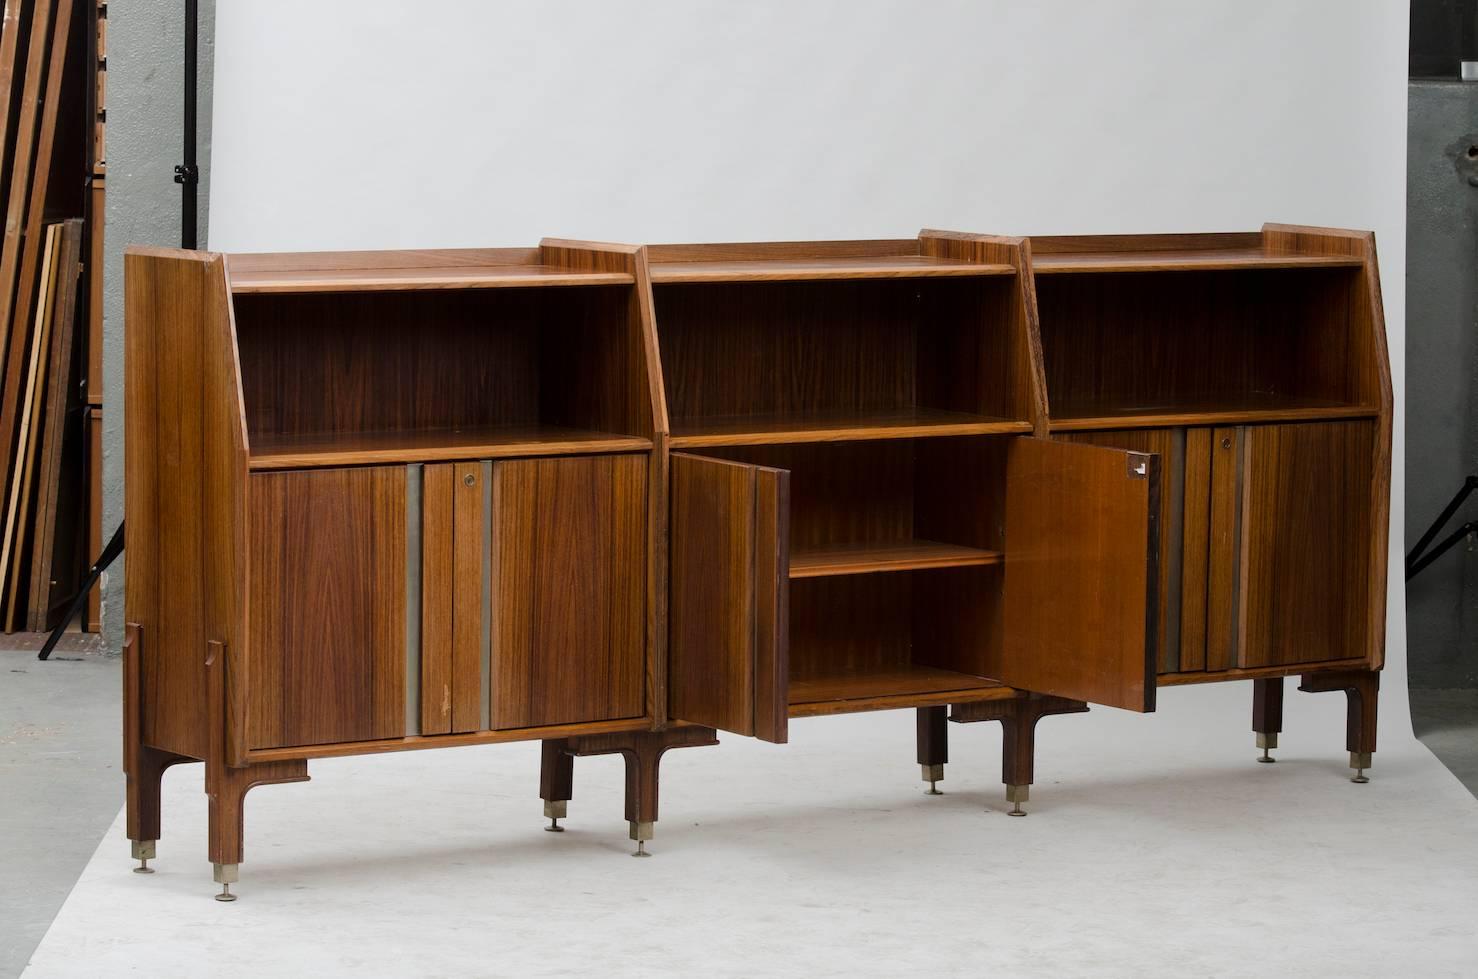 Long rosewood and stainless steel sideboard.
Price fully restored: 4400€
The price shown is in the original condition.
We have our own workshop and we can restore these items, including upholstery and all the piece might need.